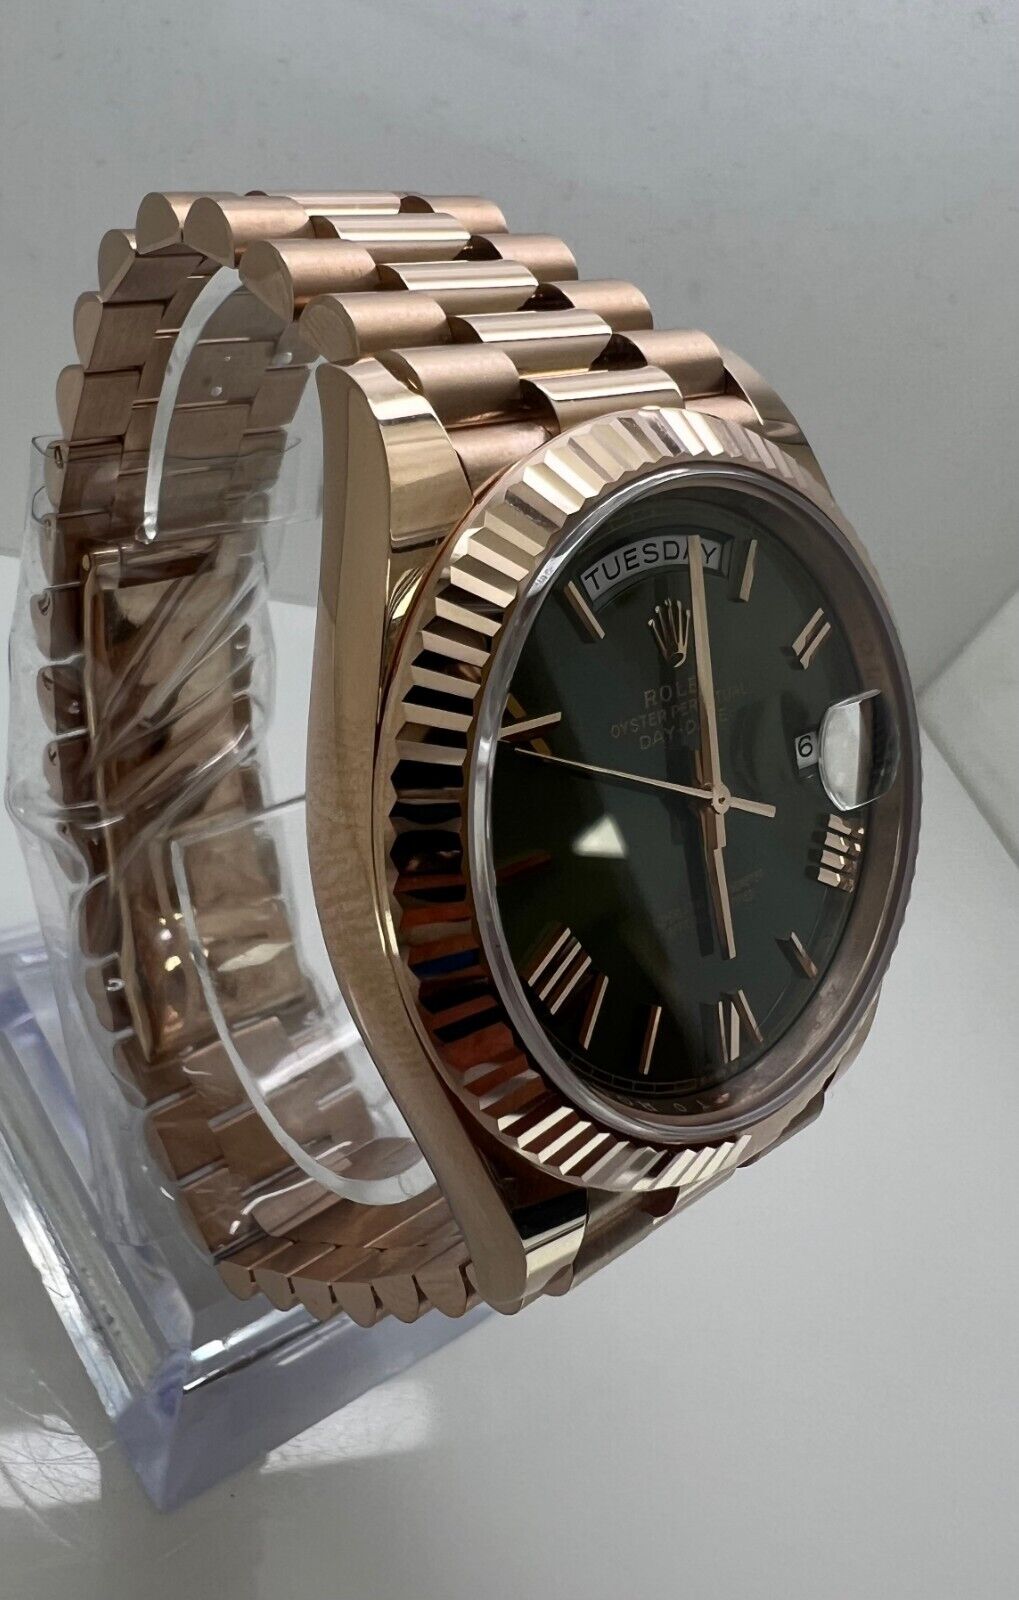 Rolex Day-Date 228235 Pink President Bracelet with Pink Bezel Olive Dial Watch